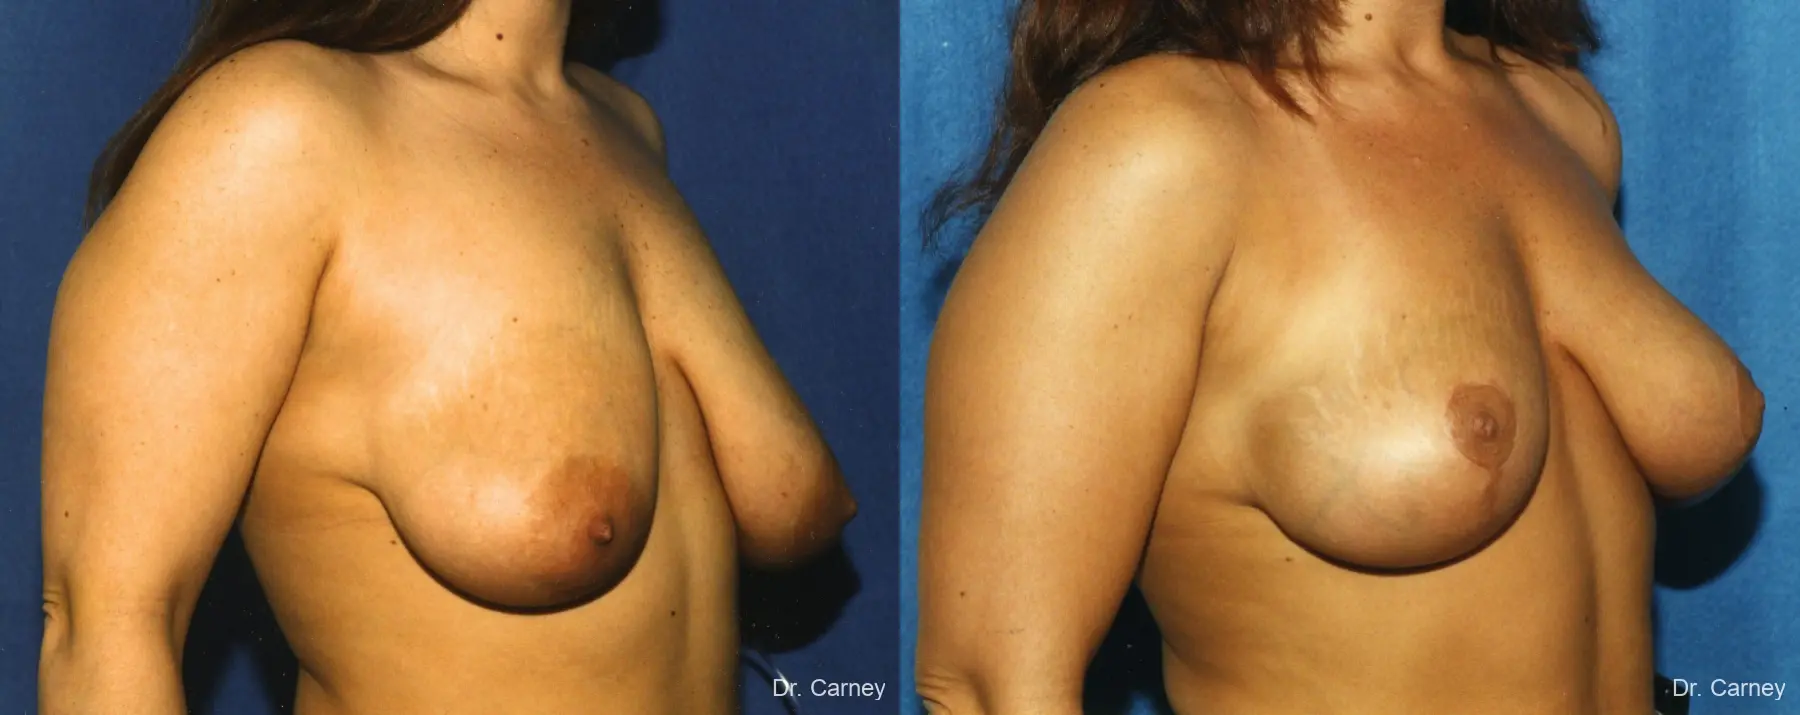 Virginia Beach Breast Lift 1187 - Before and After